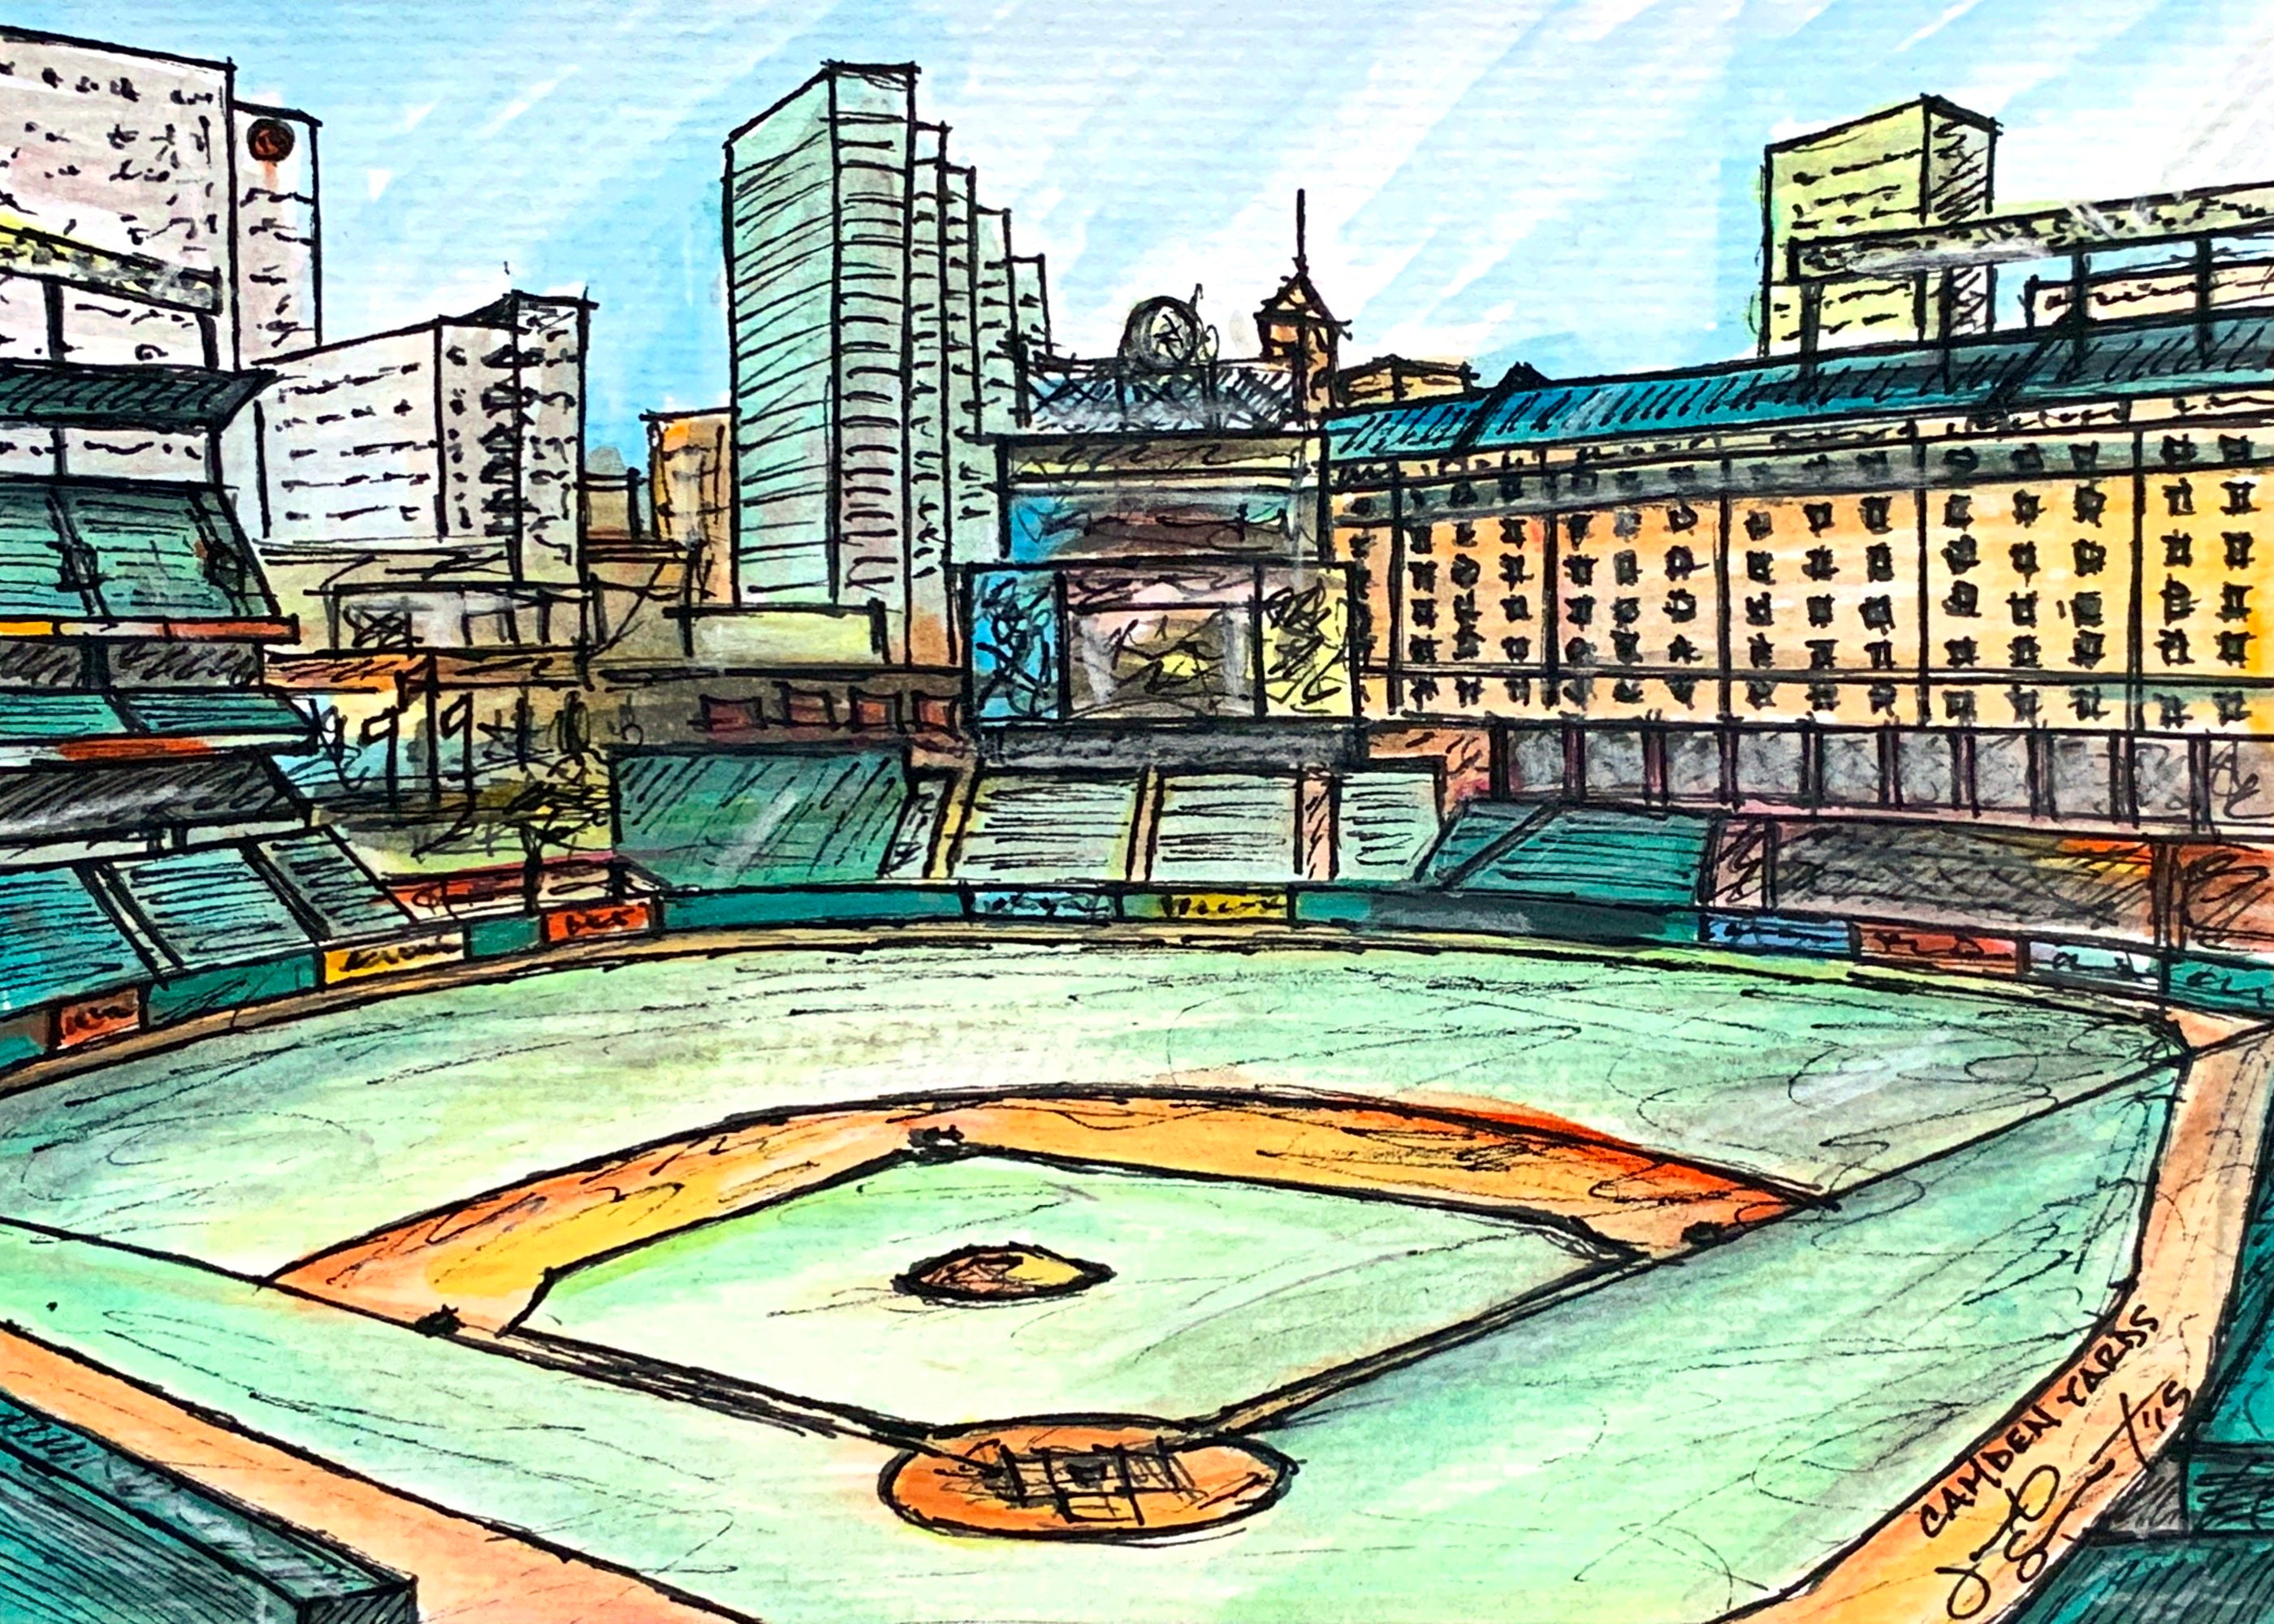 Camden Yards - 5x7 - Watercolor/Ink on Paper - Framed